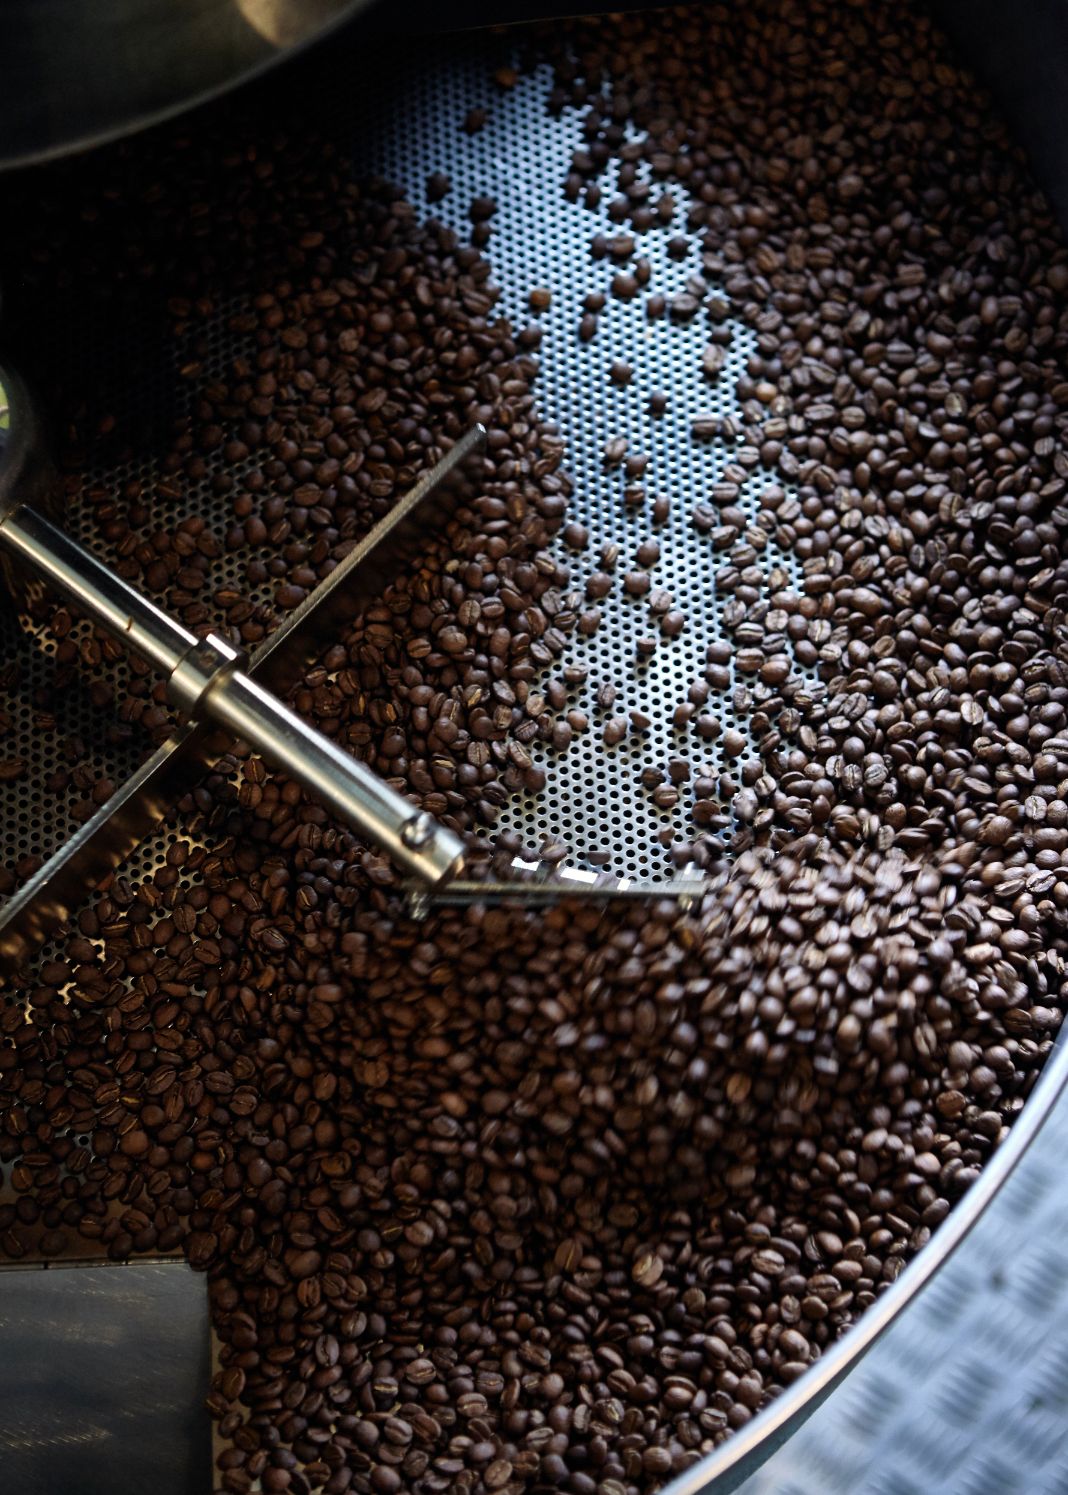 Ethical Specialty Coffee being roasted in a coffee roaster